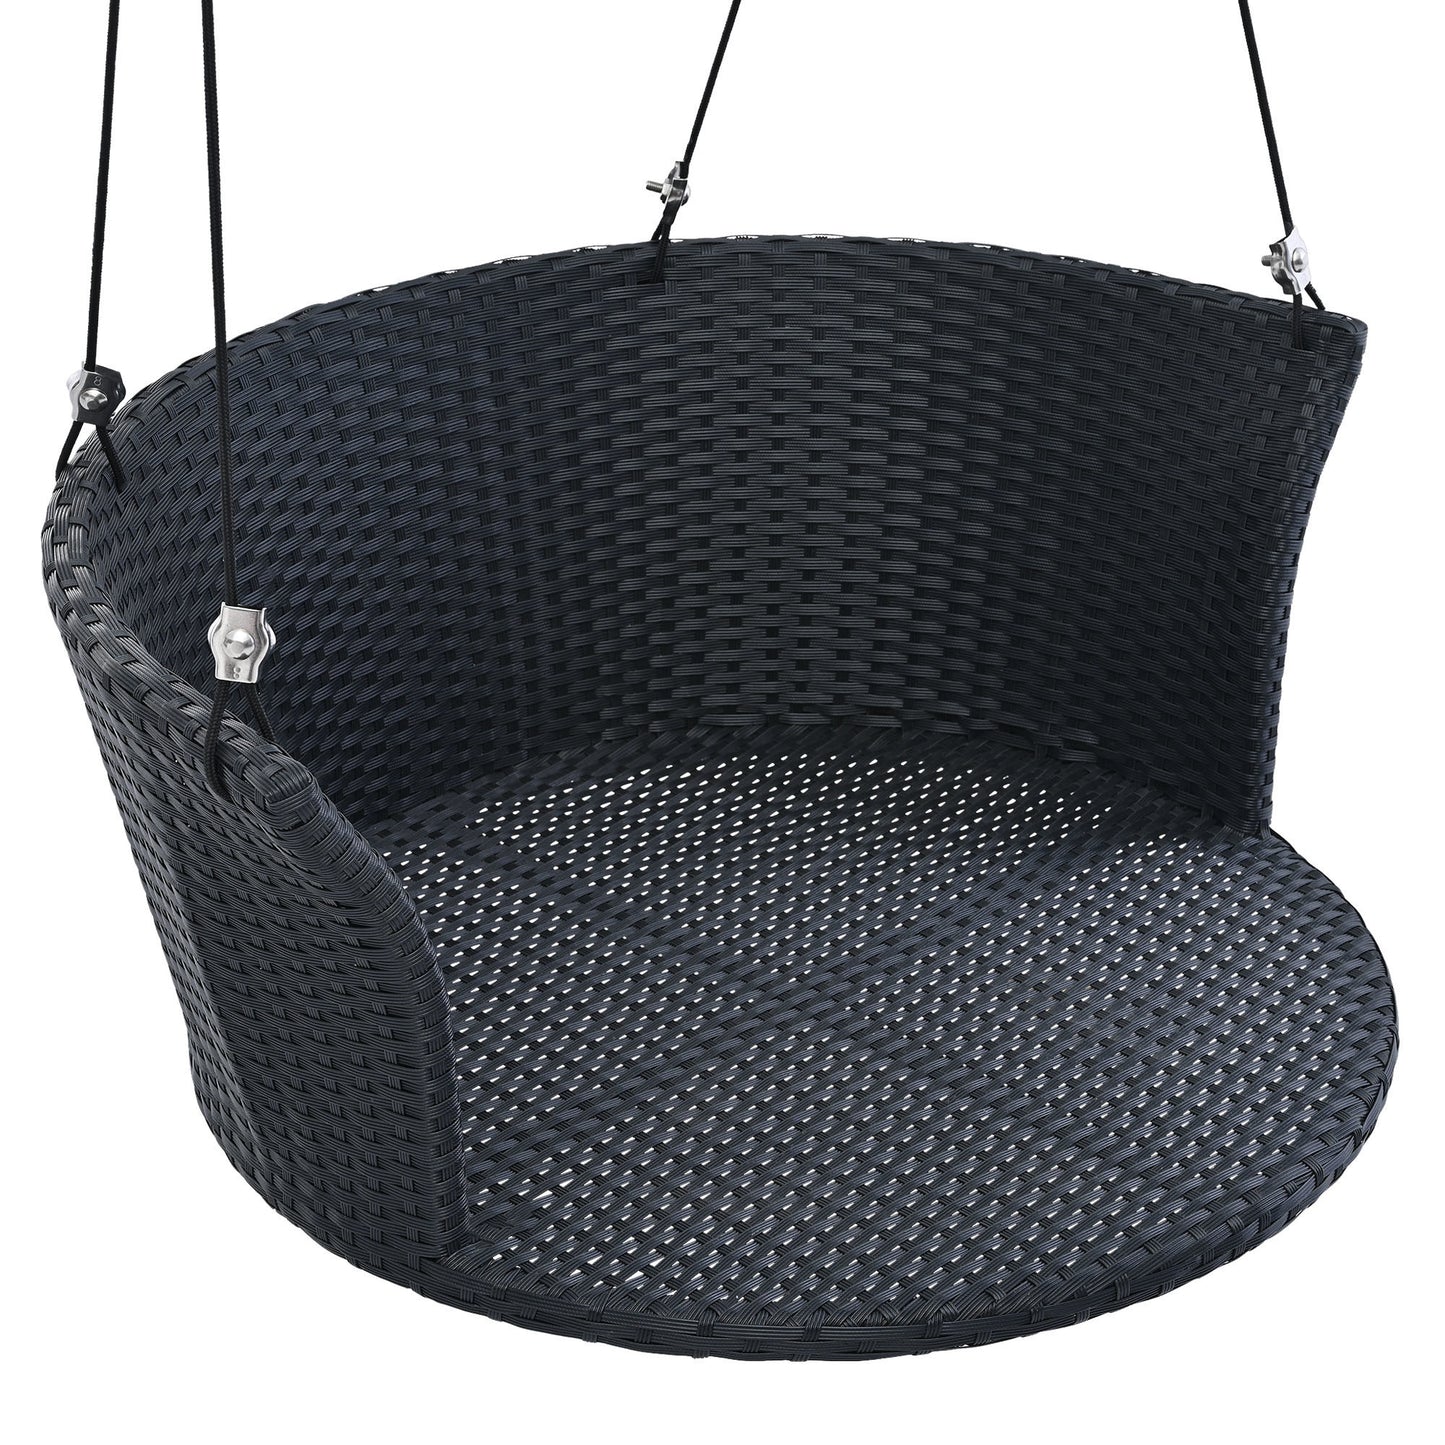 Single Person Hanging Seat; Rattan Woven Swing Chair; Porch Swing With